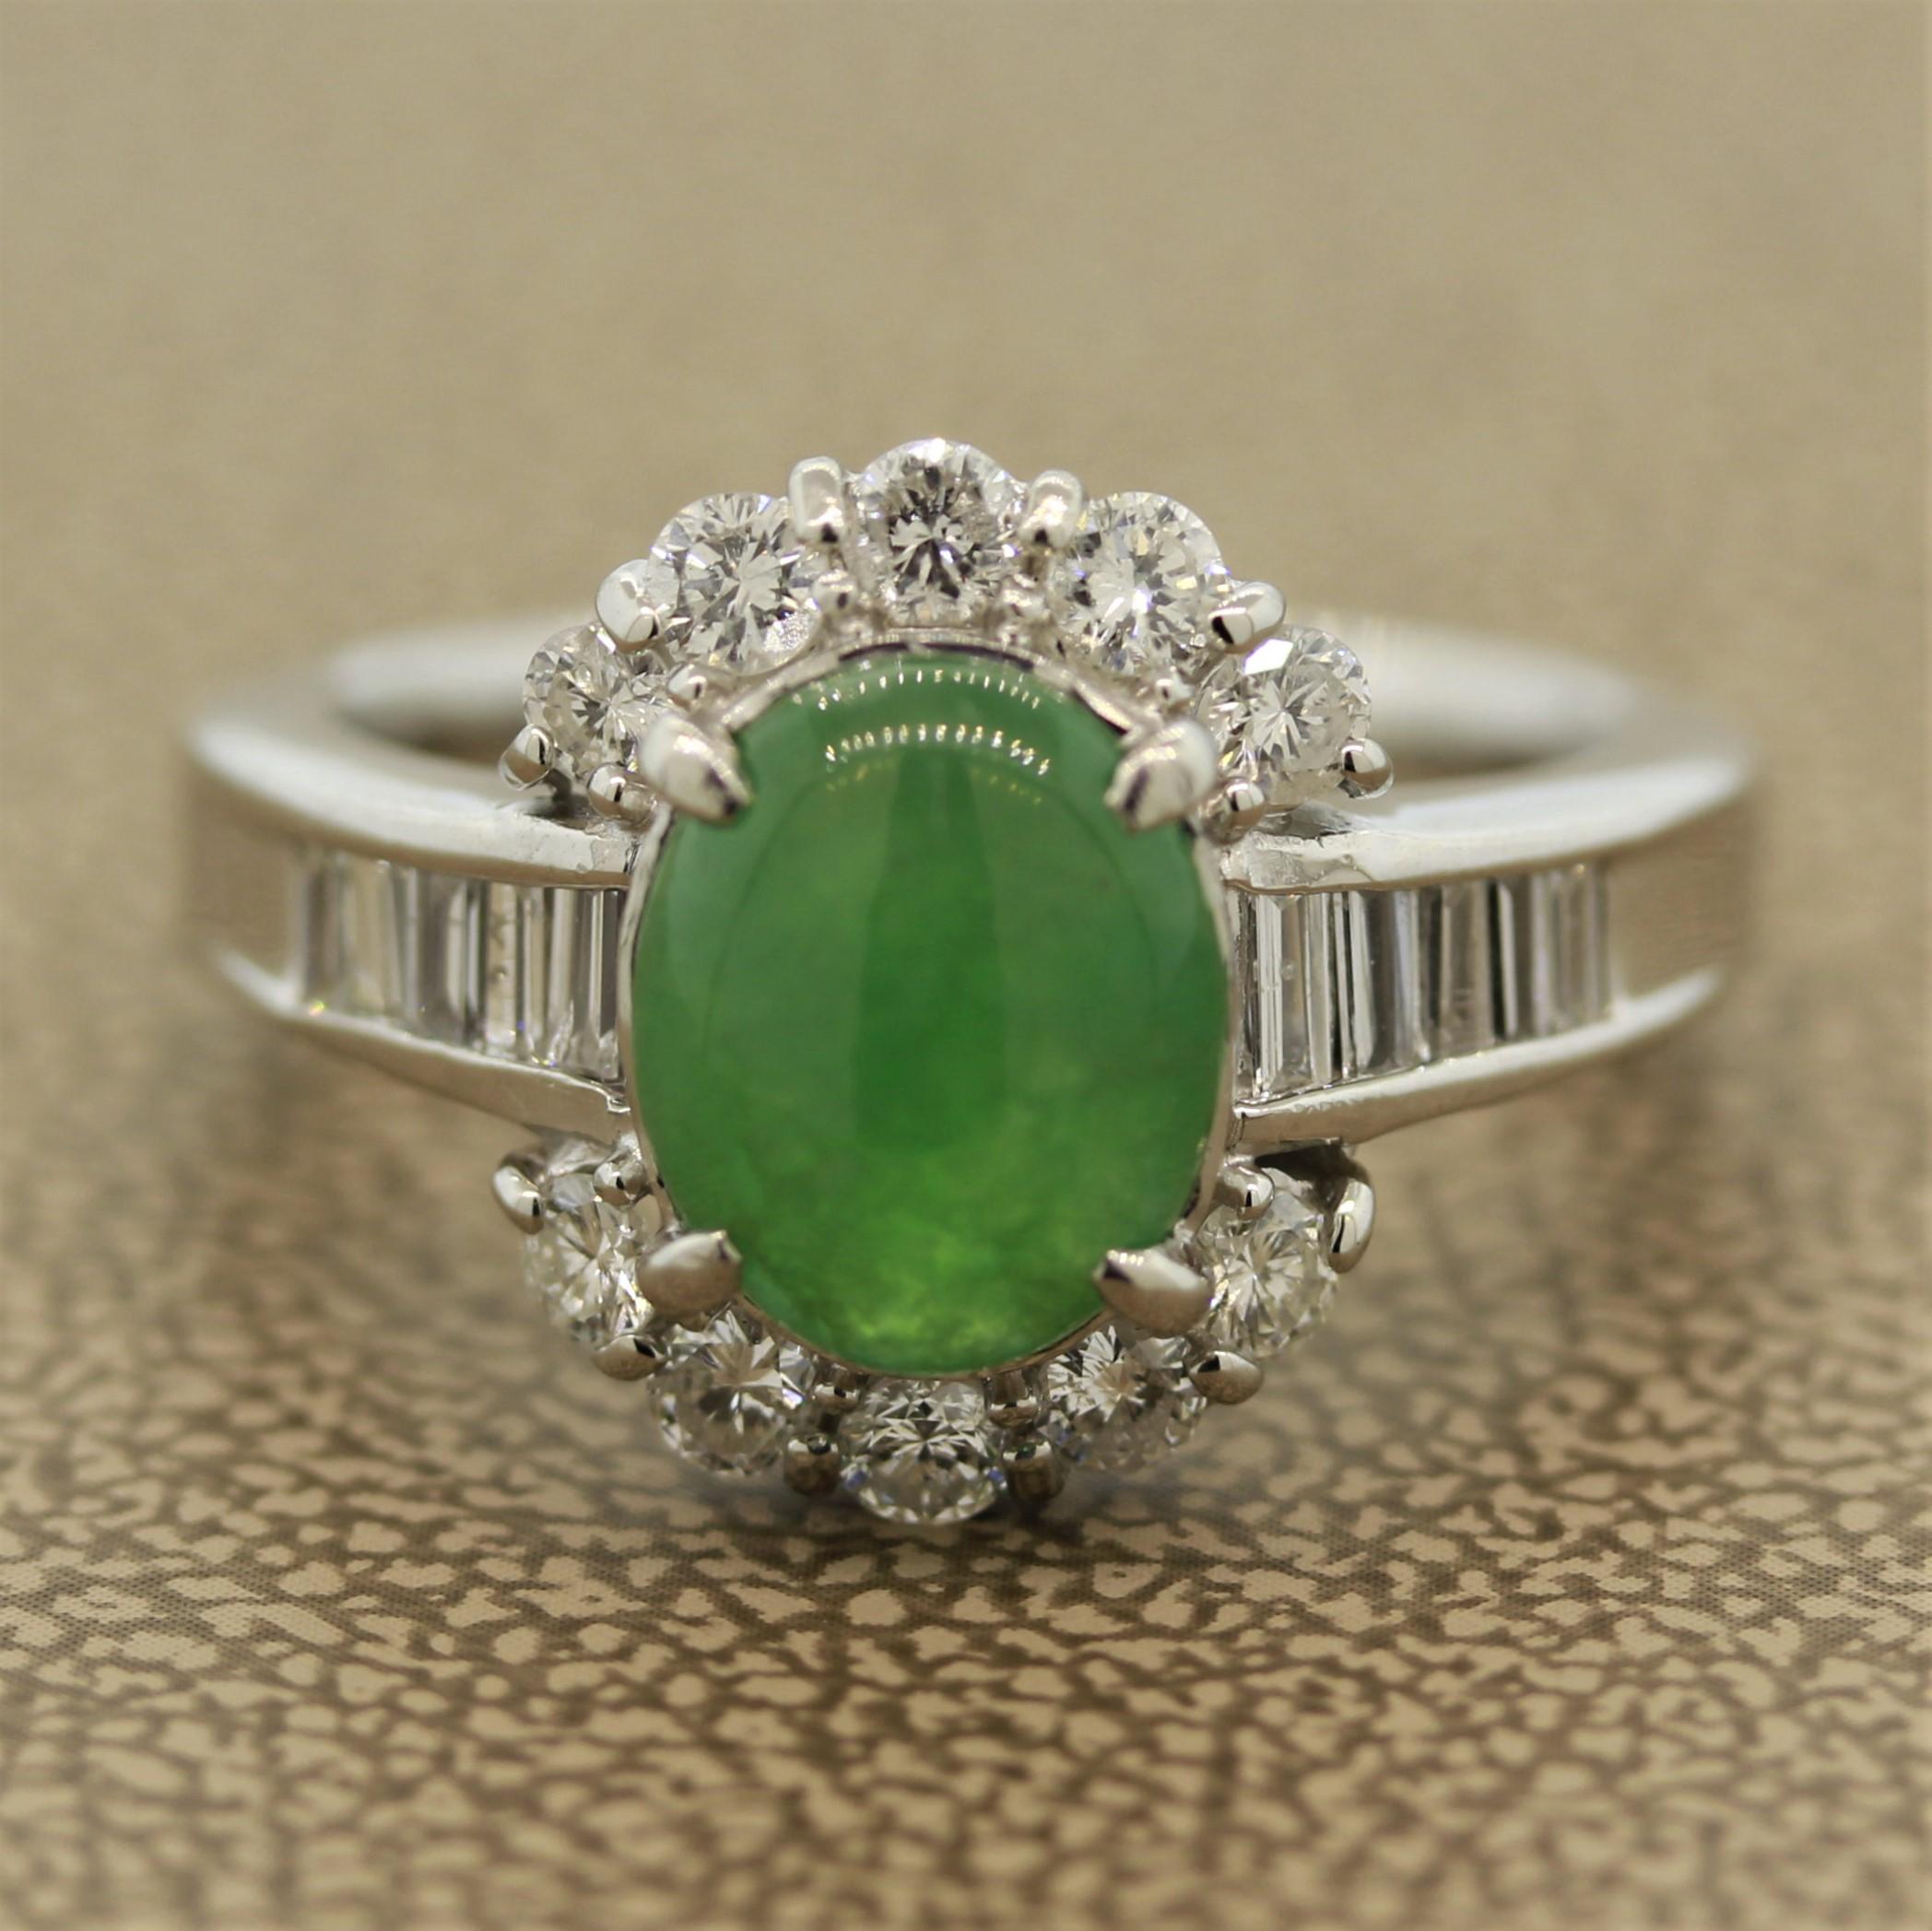 A natural Jadeite Jade ring set in a hand fabricated platinum mounting that can be worn every day. The jade weighs 2.04 carats and is completed by 0.80 carats of round brilliant and baguette cut diamonds that run down the shoulder of the ring.